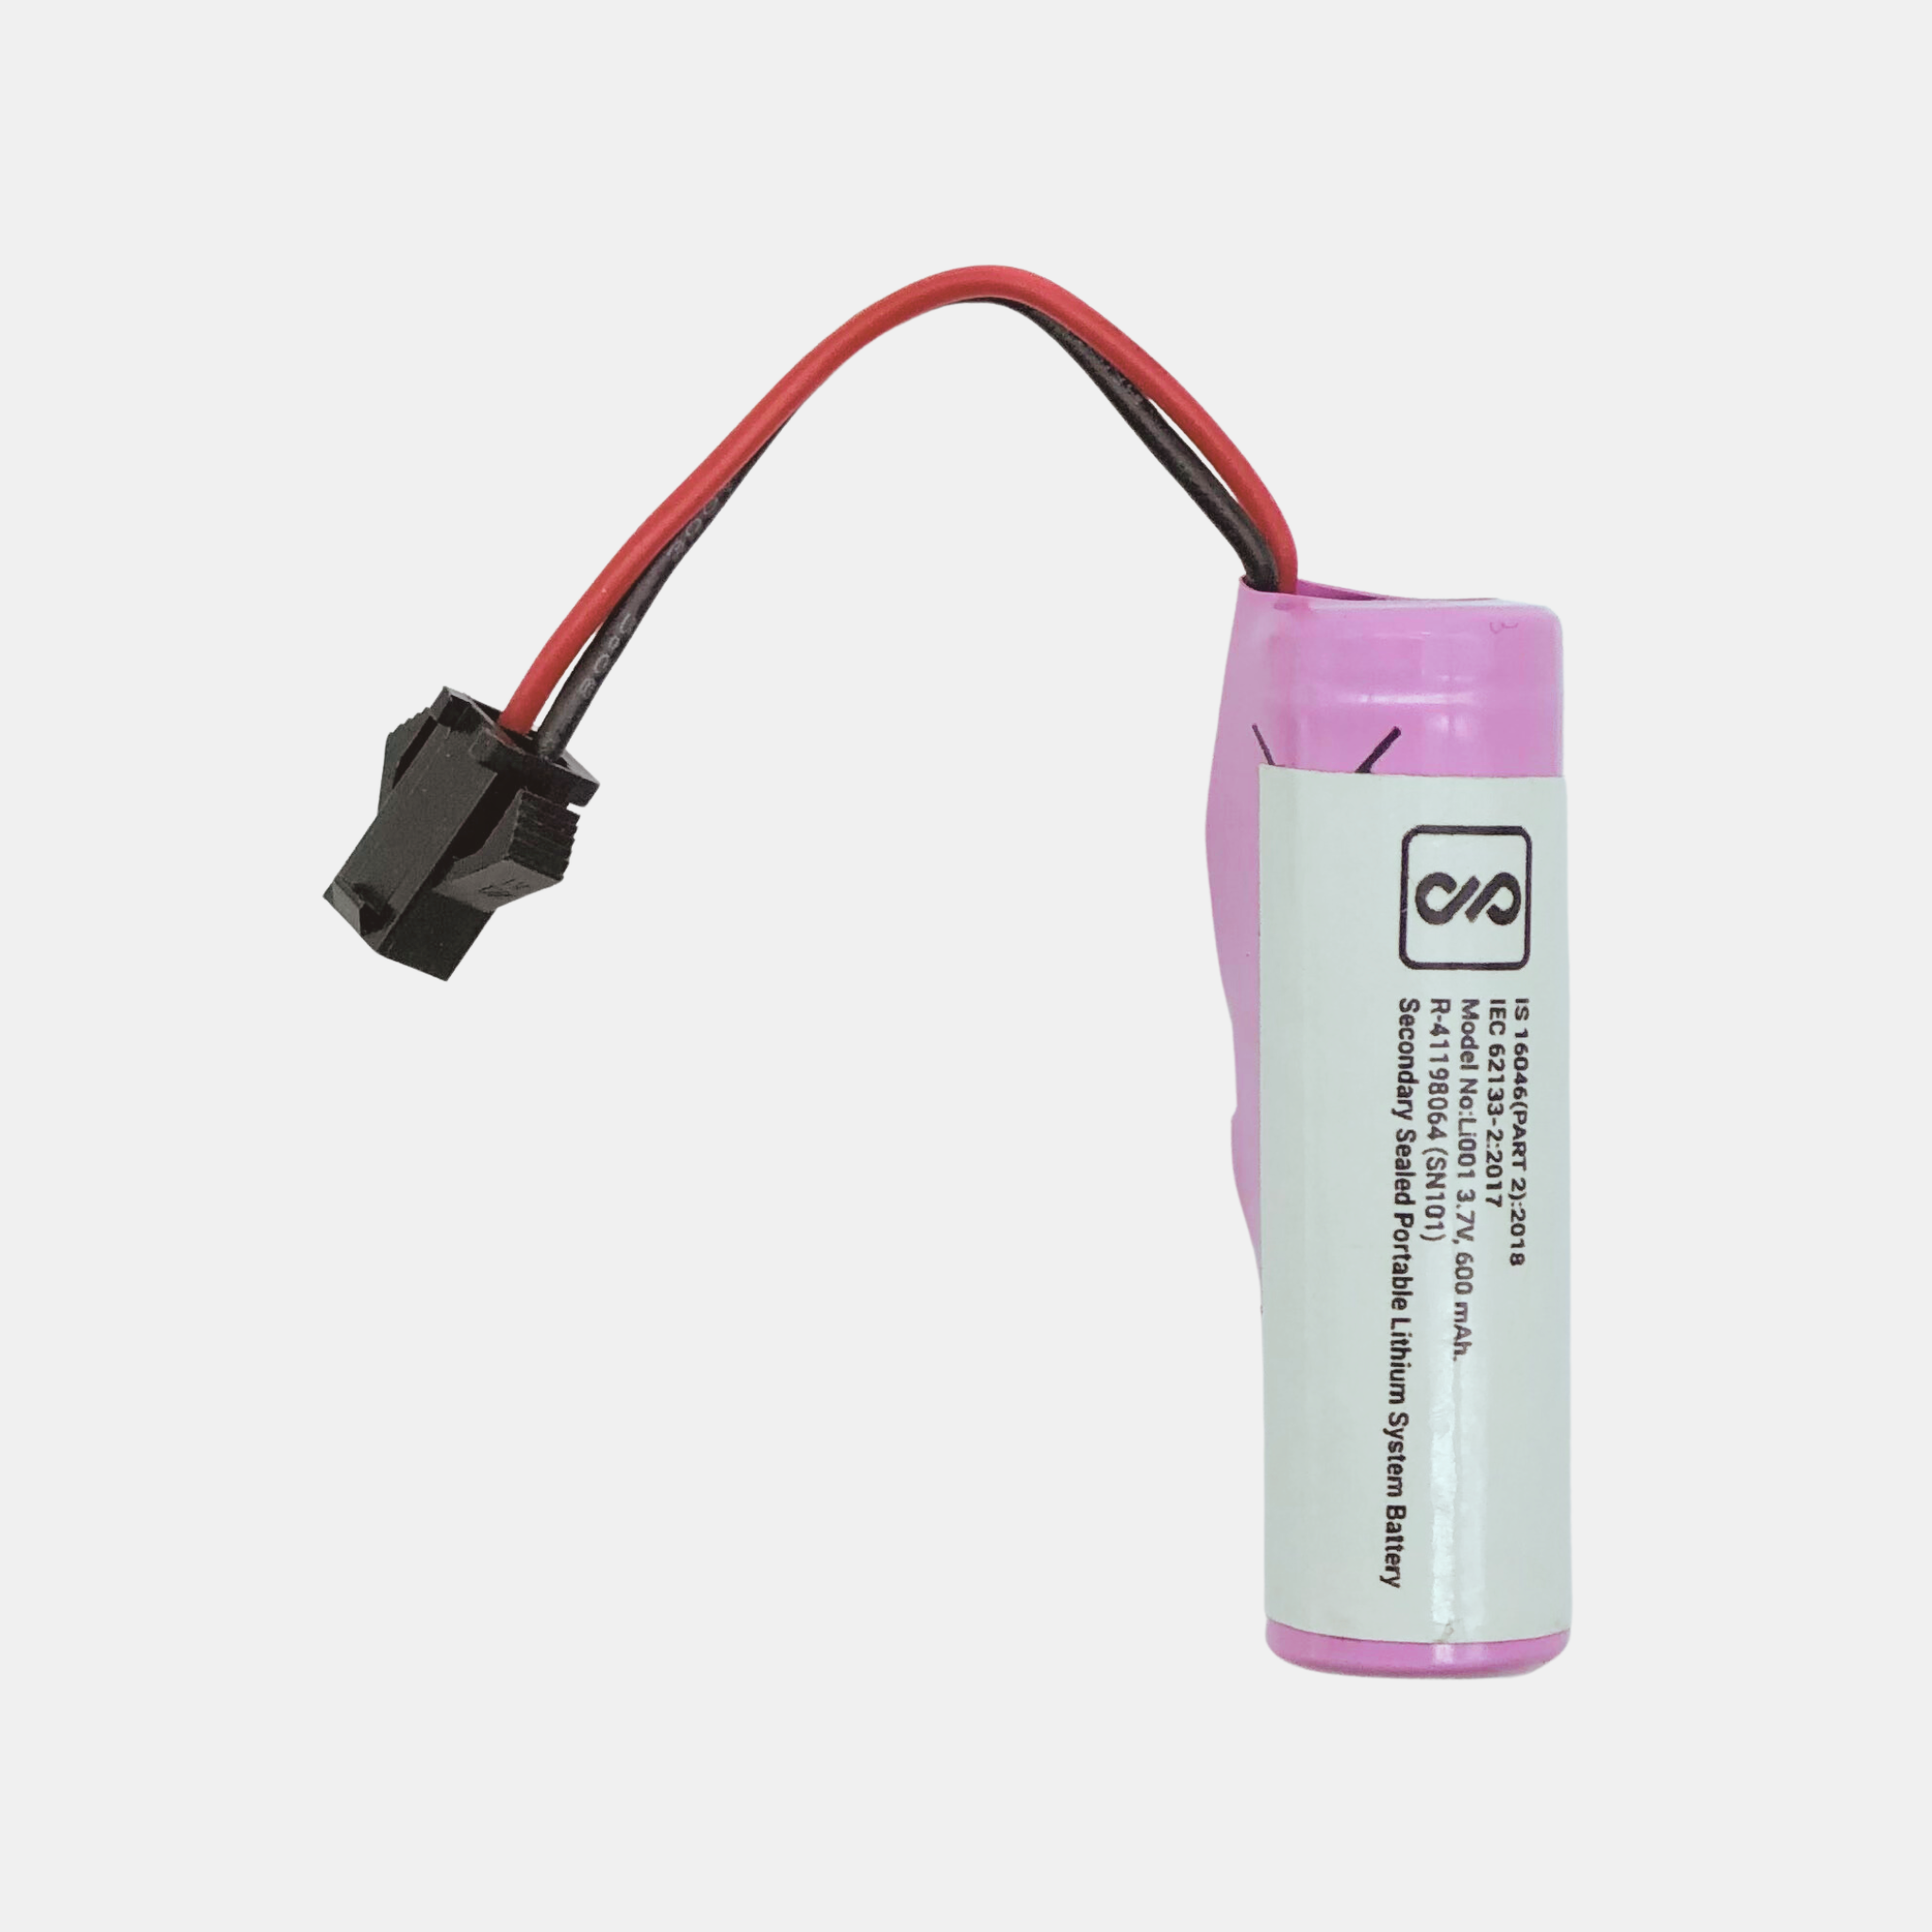 Lithium Ion Rechargeable Battery 3.7V